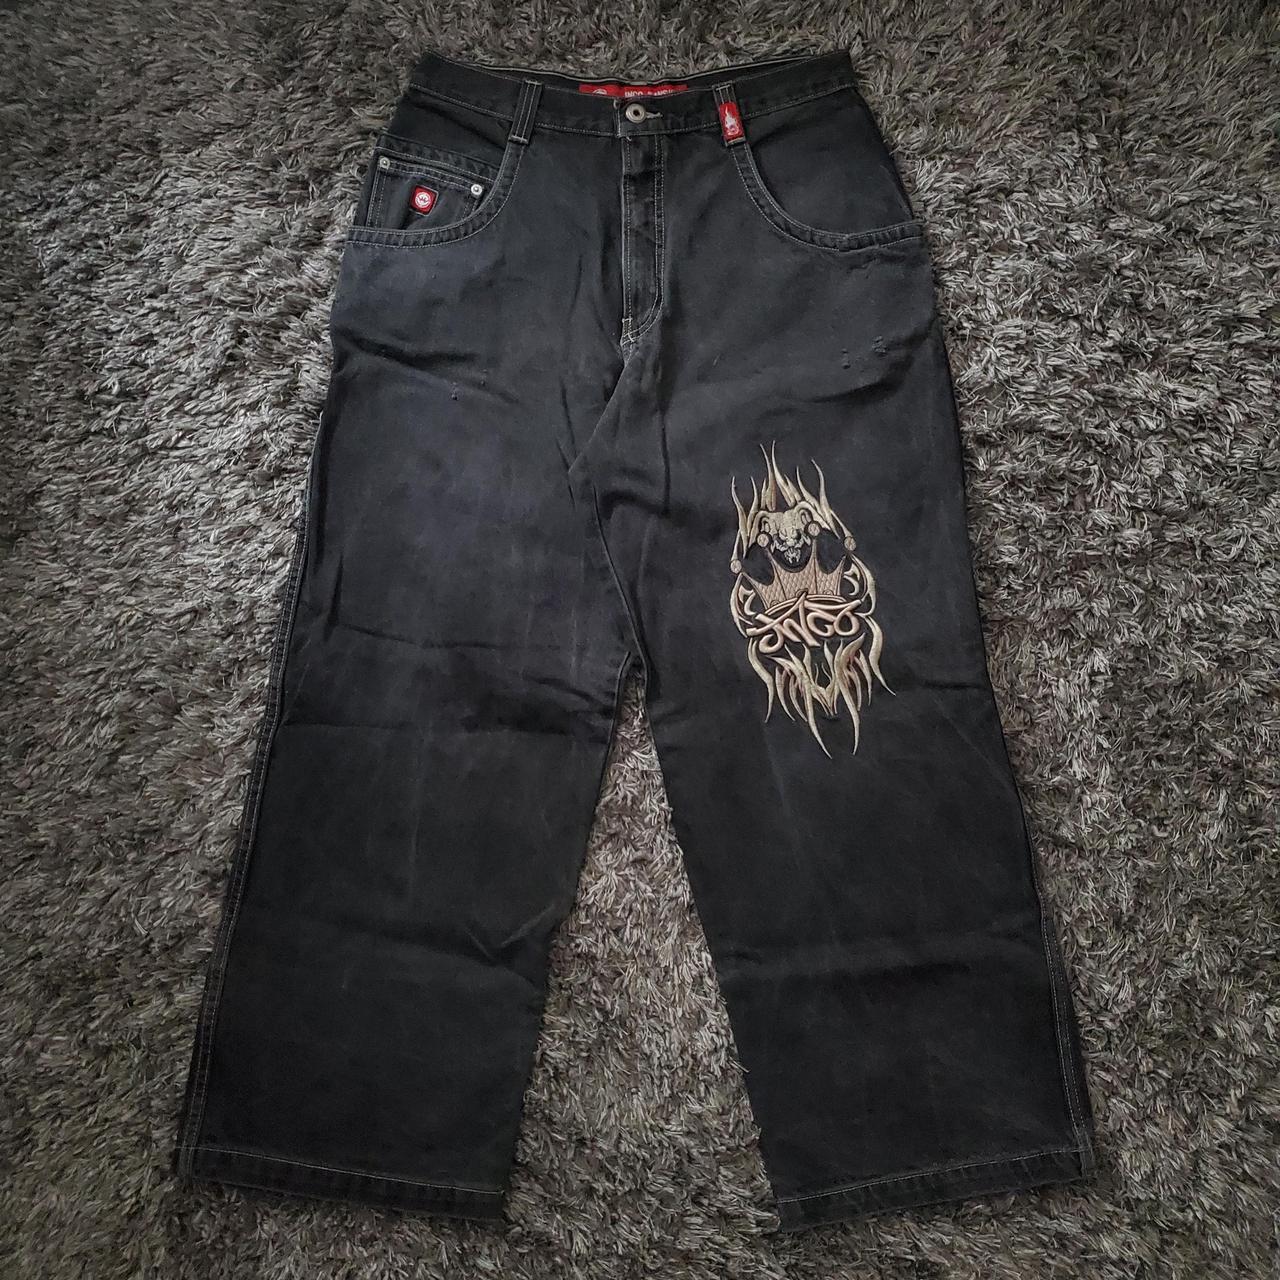 Snakebite jnco tribal jeans these my most worn jeans... - Depop